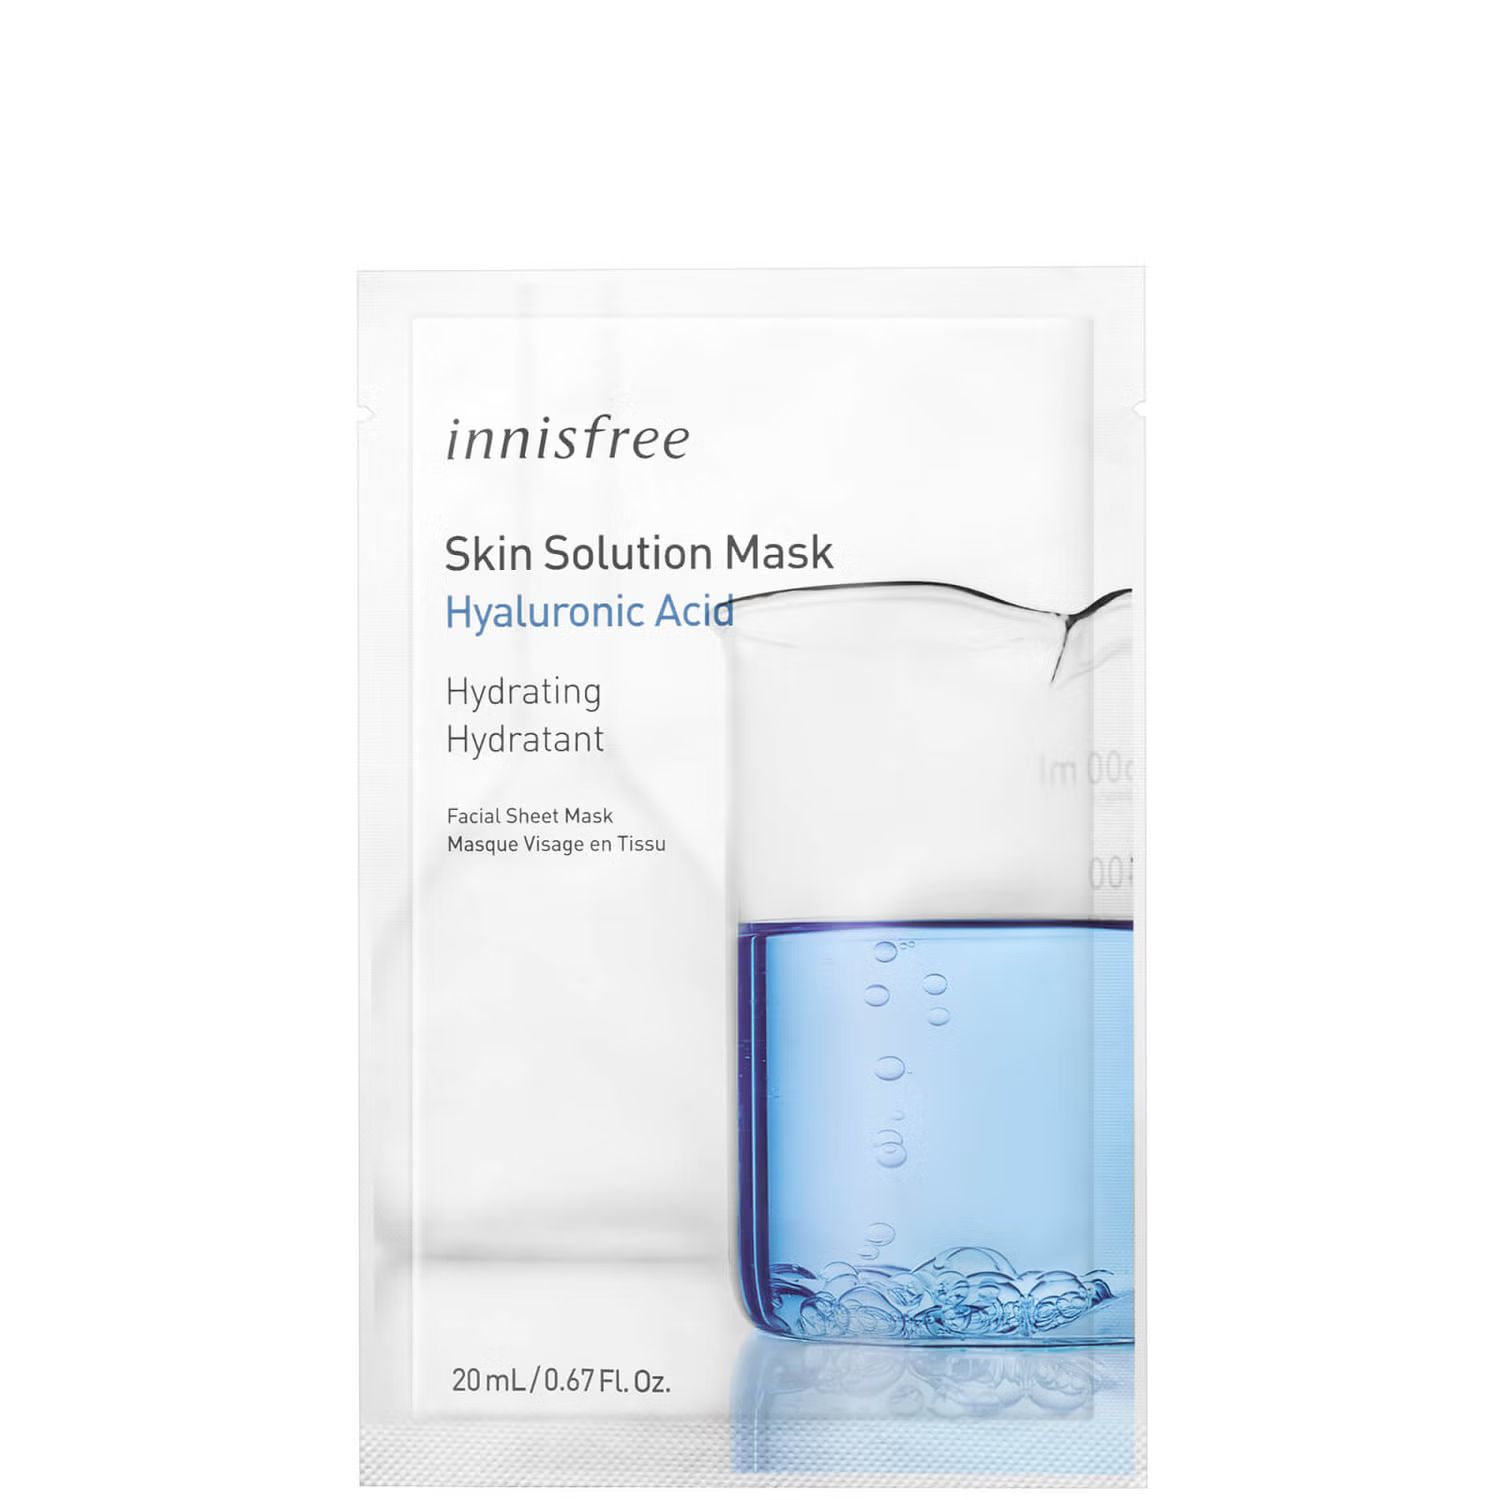 innisfree Skin Solution Mask with Hyaluronic Acid 20g | Cult Beauty